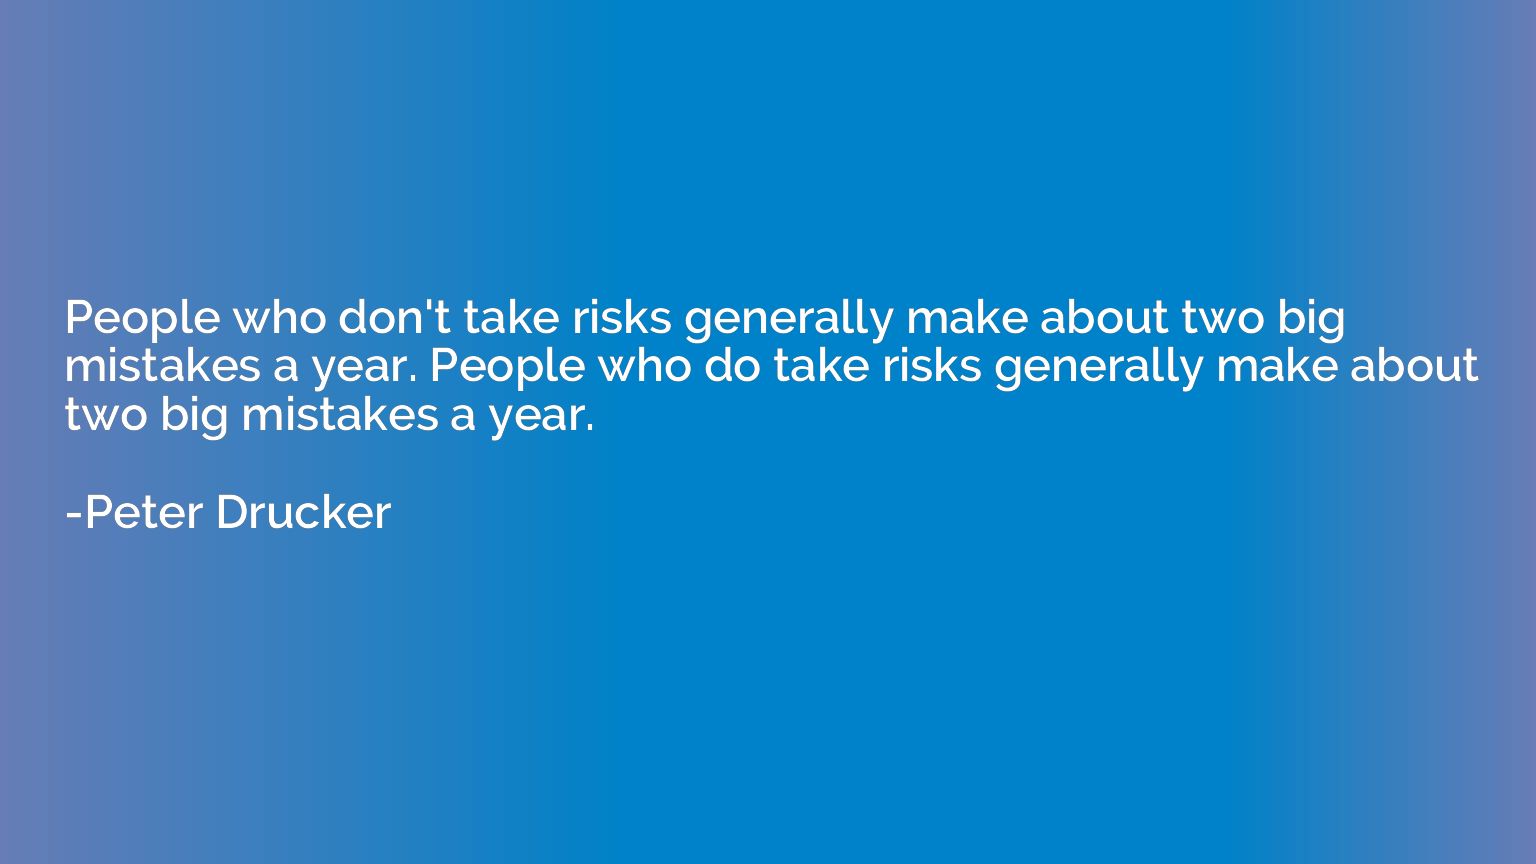 People who don't take risks generally make about two big mis